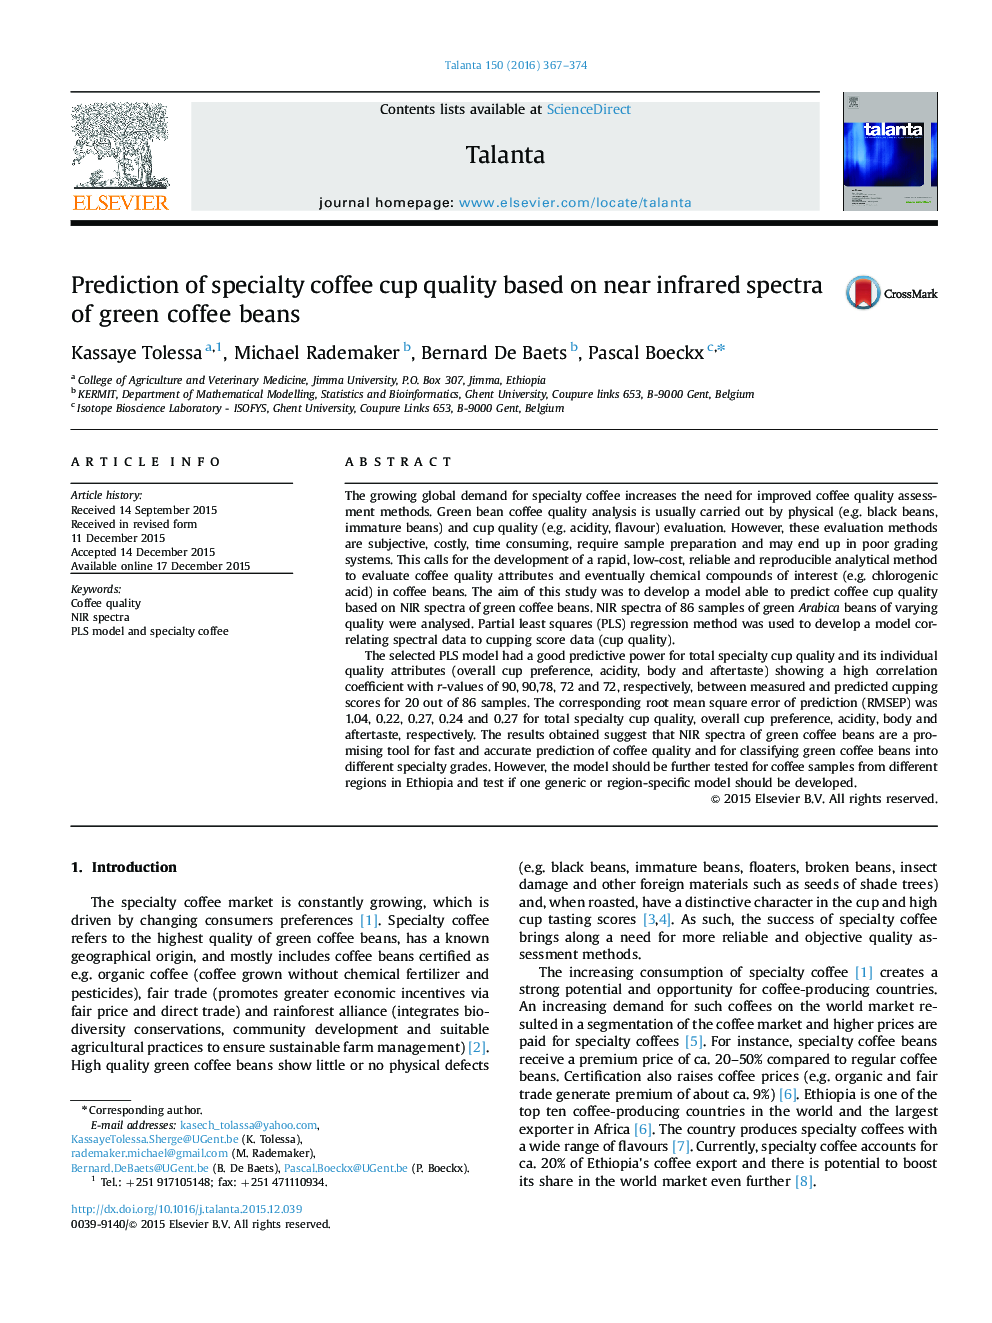 Prediction of specialty coffee cup quality based on near infrared spectra of green coffee beans